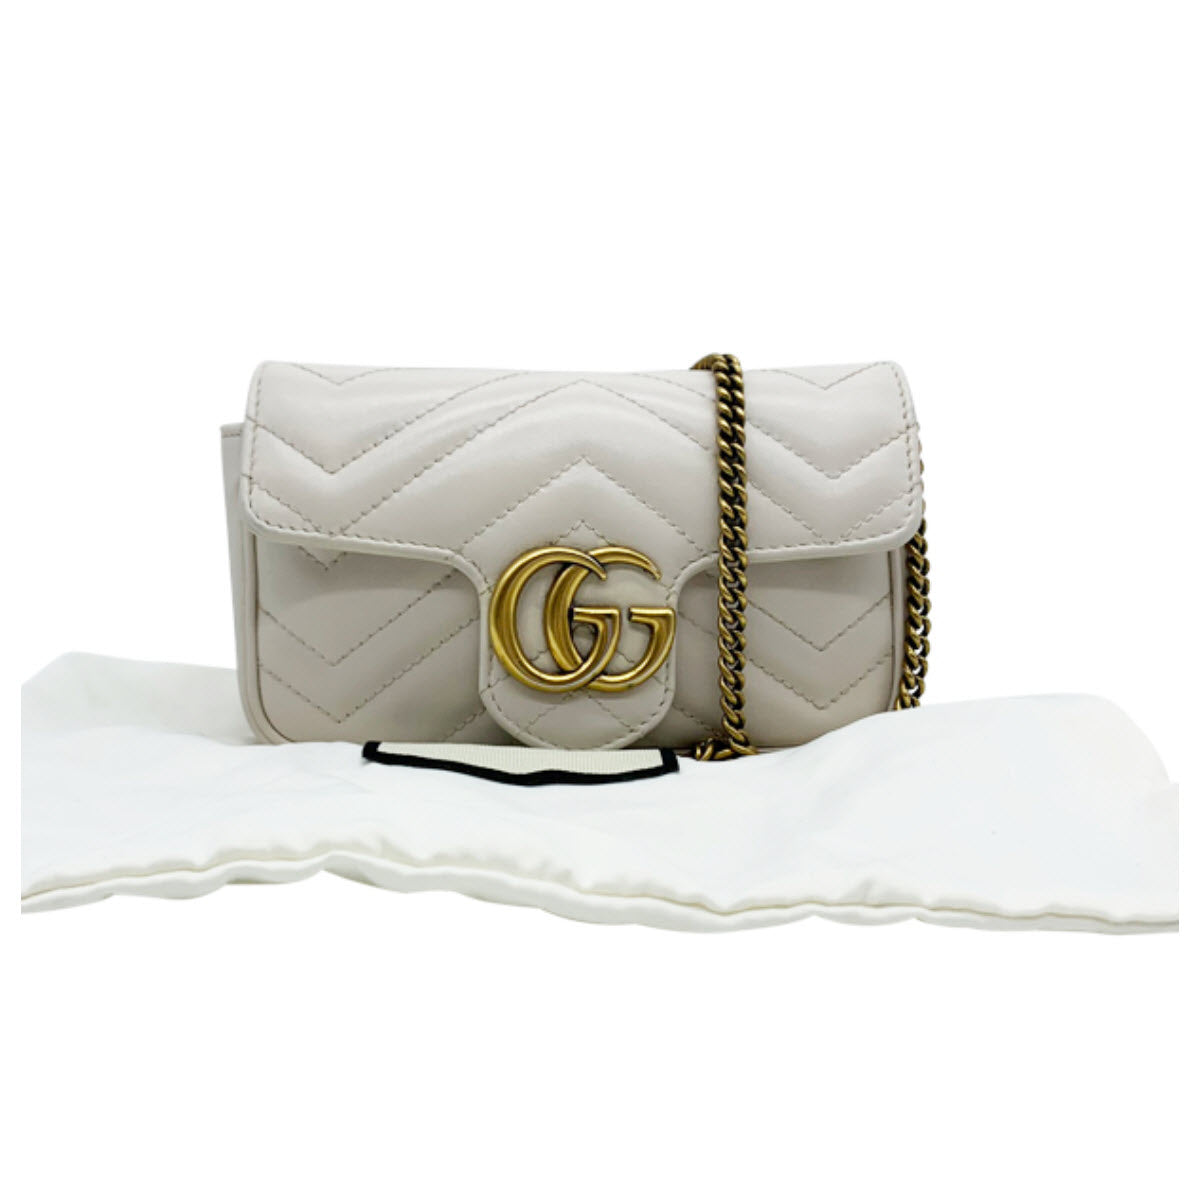 Gucci GG Marmont Mini White Leather Shoulder Bag - MyDesignerly